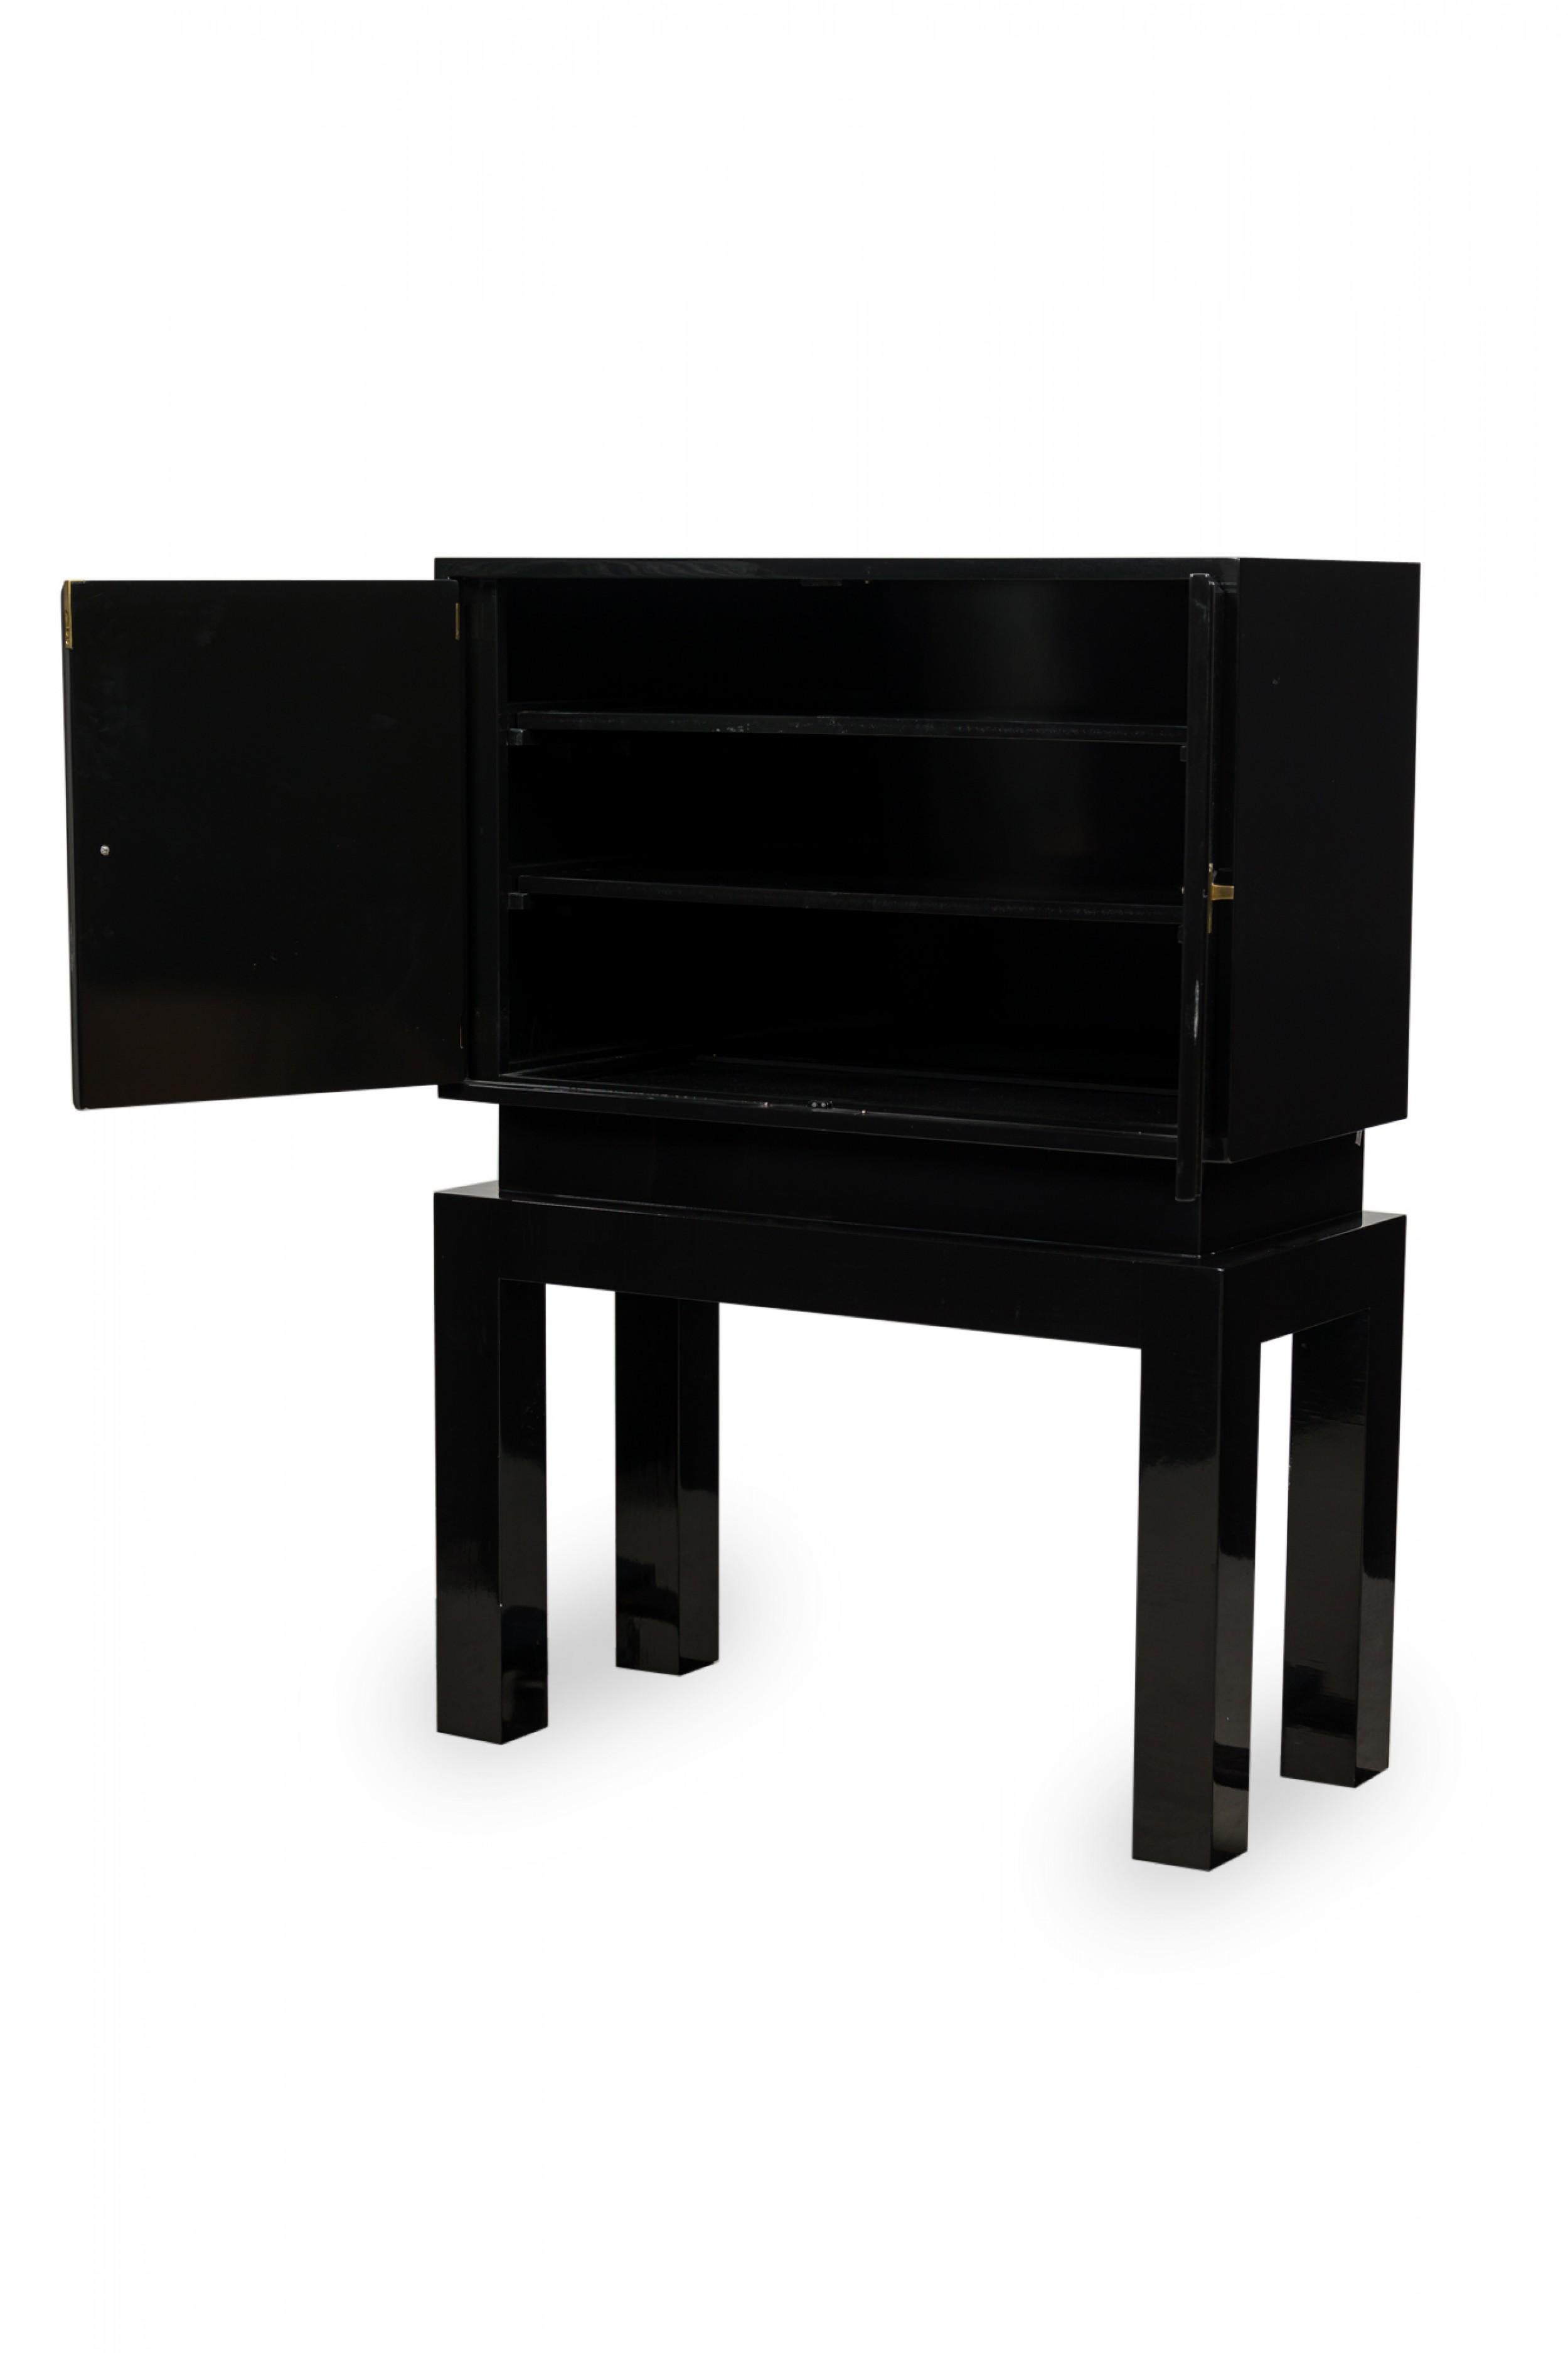 Bronze Tommi Parzinger Midcentury American Modern Black Lacquered Bar Cabinet For Sale